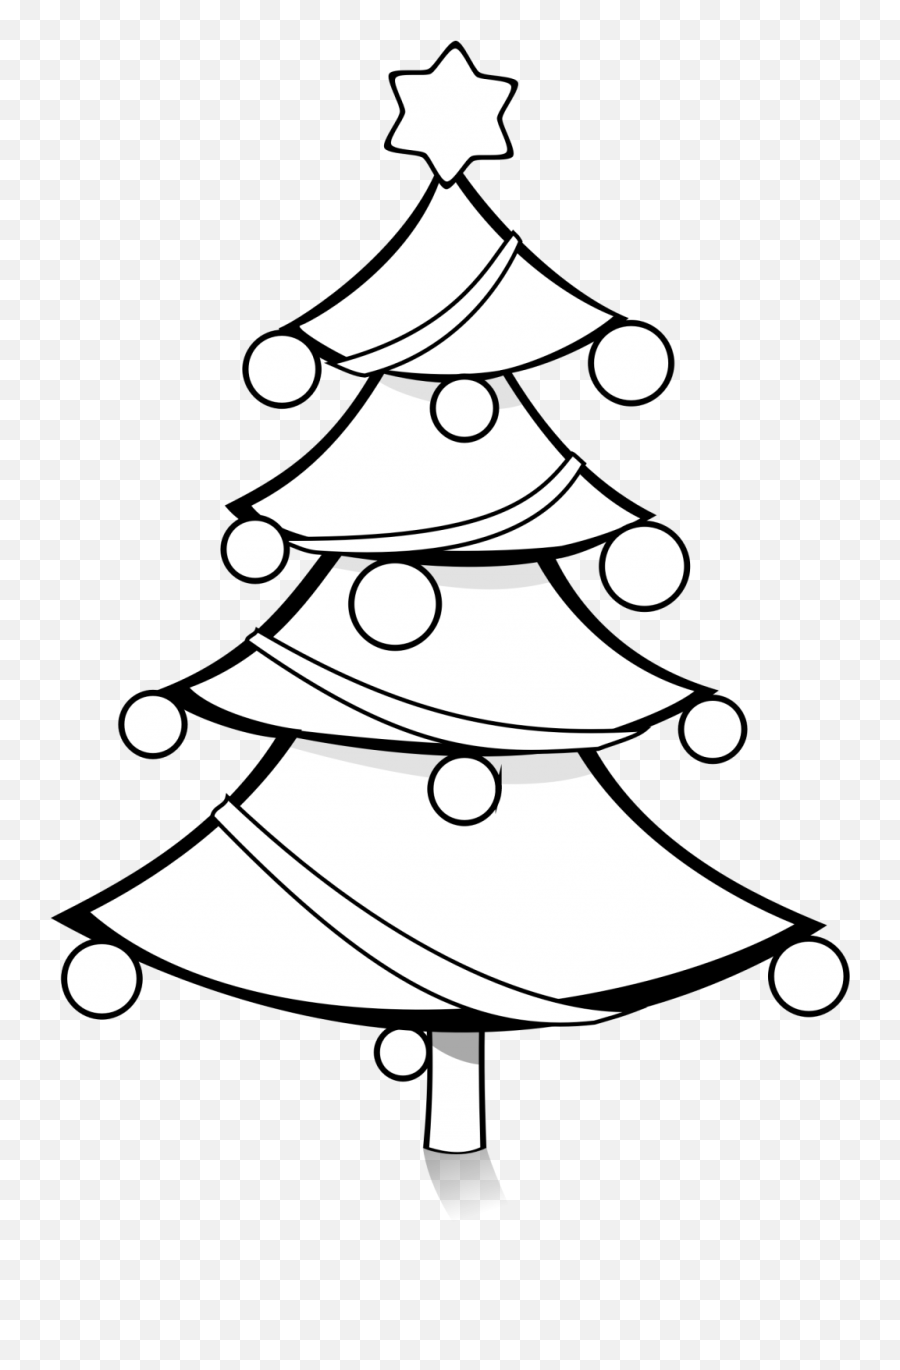 Christmas Tree Black And White Picture - Christmas Balls Clipart Black And White Emoji,Xmas Emoji